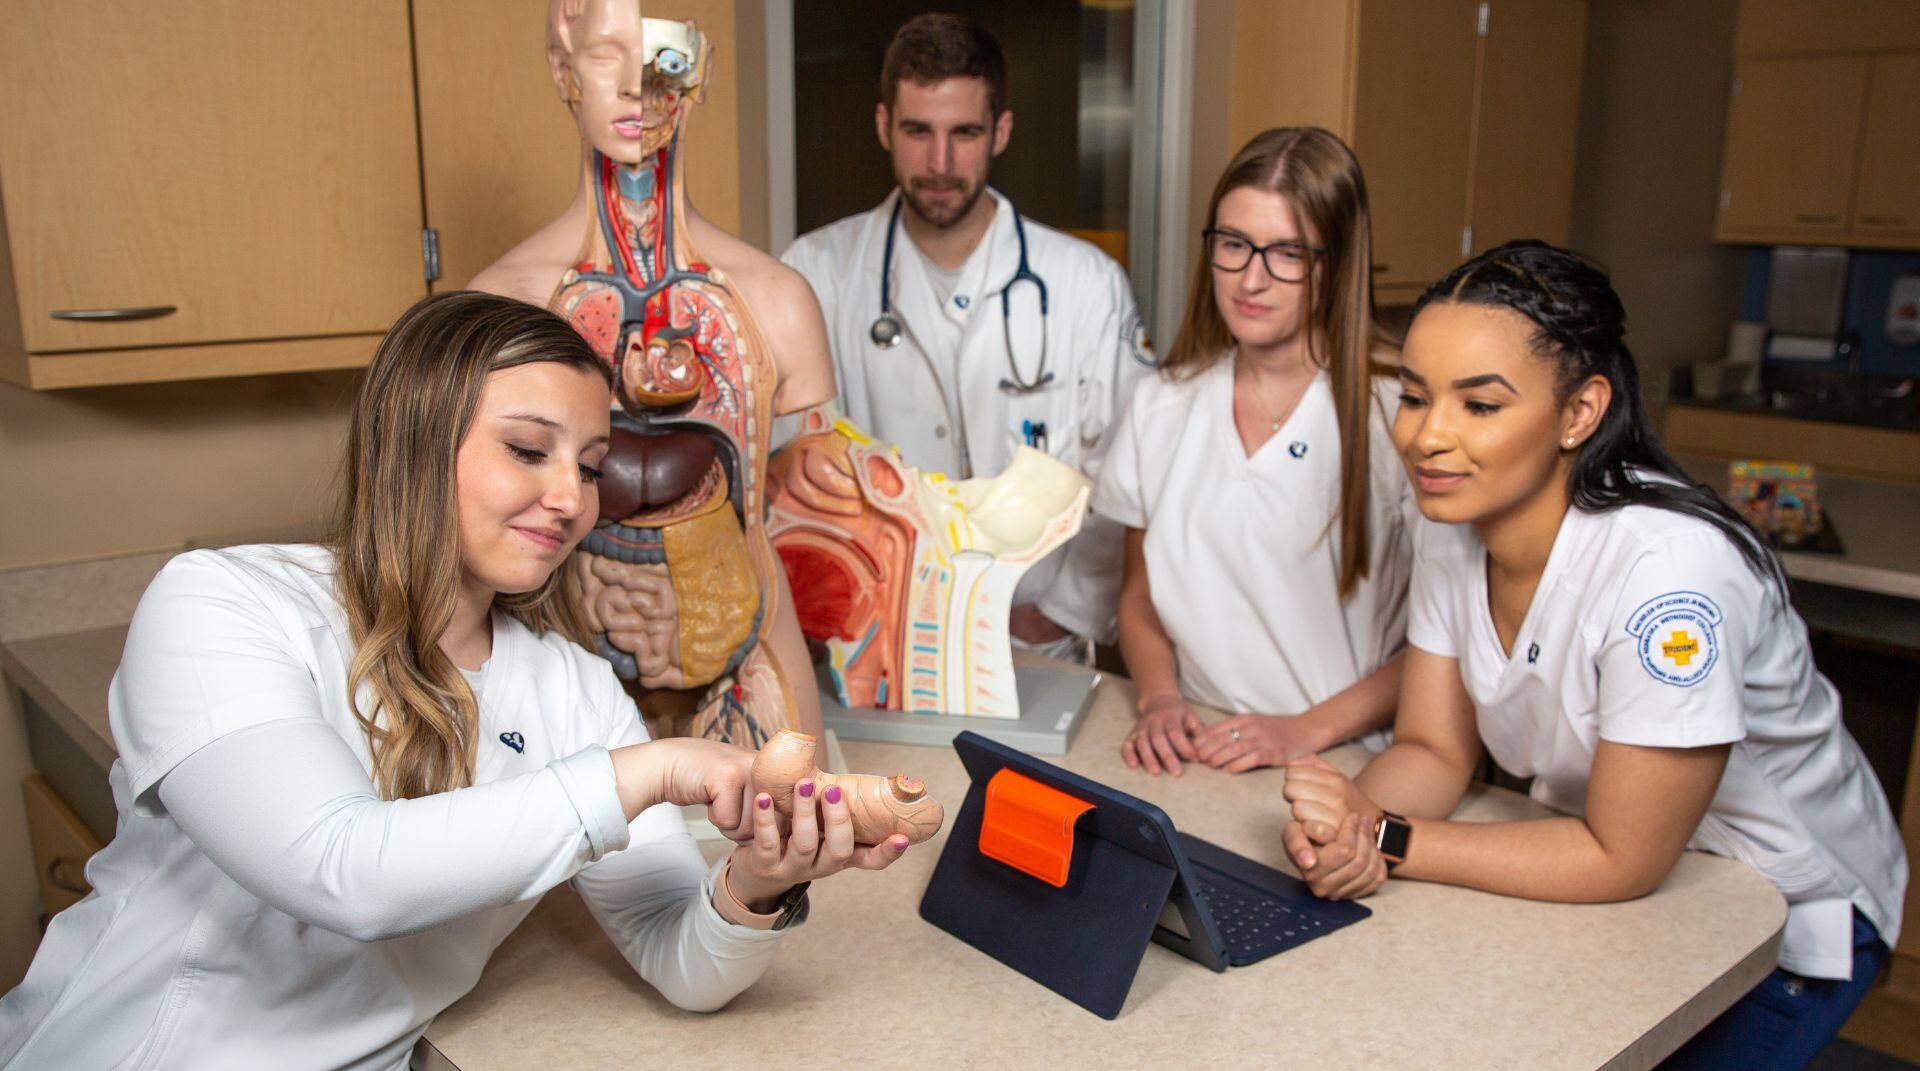 Find out How to Get into Nursing School